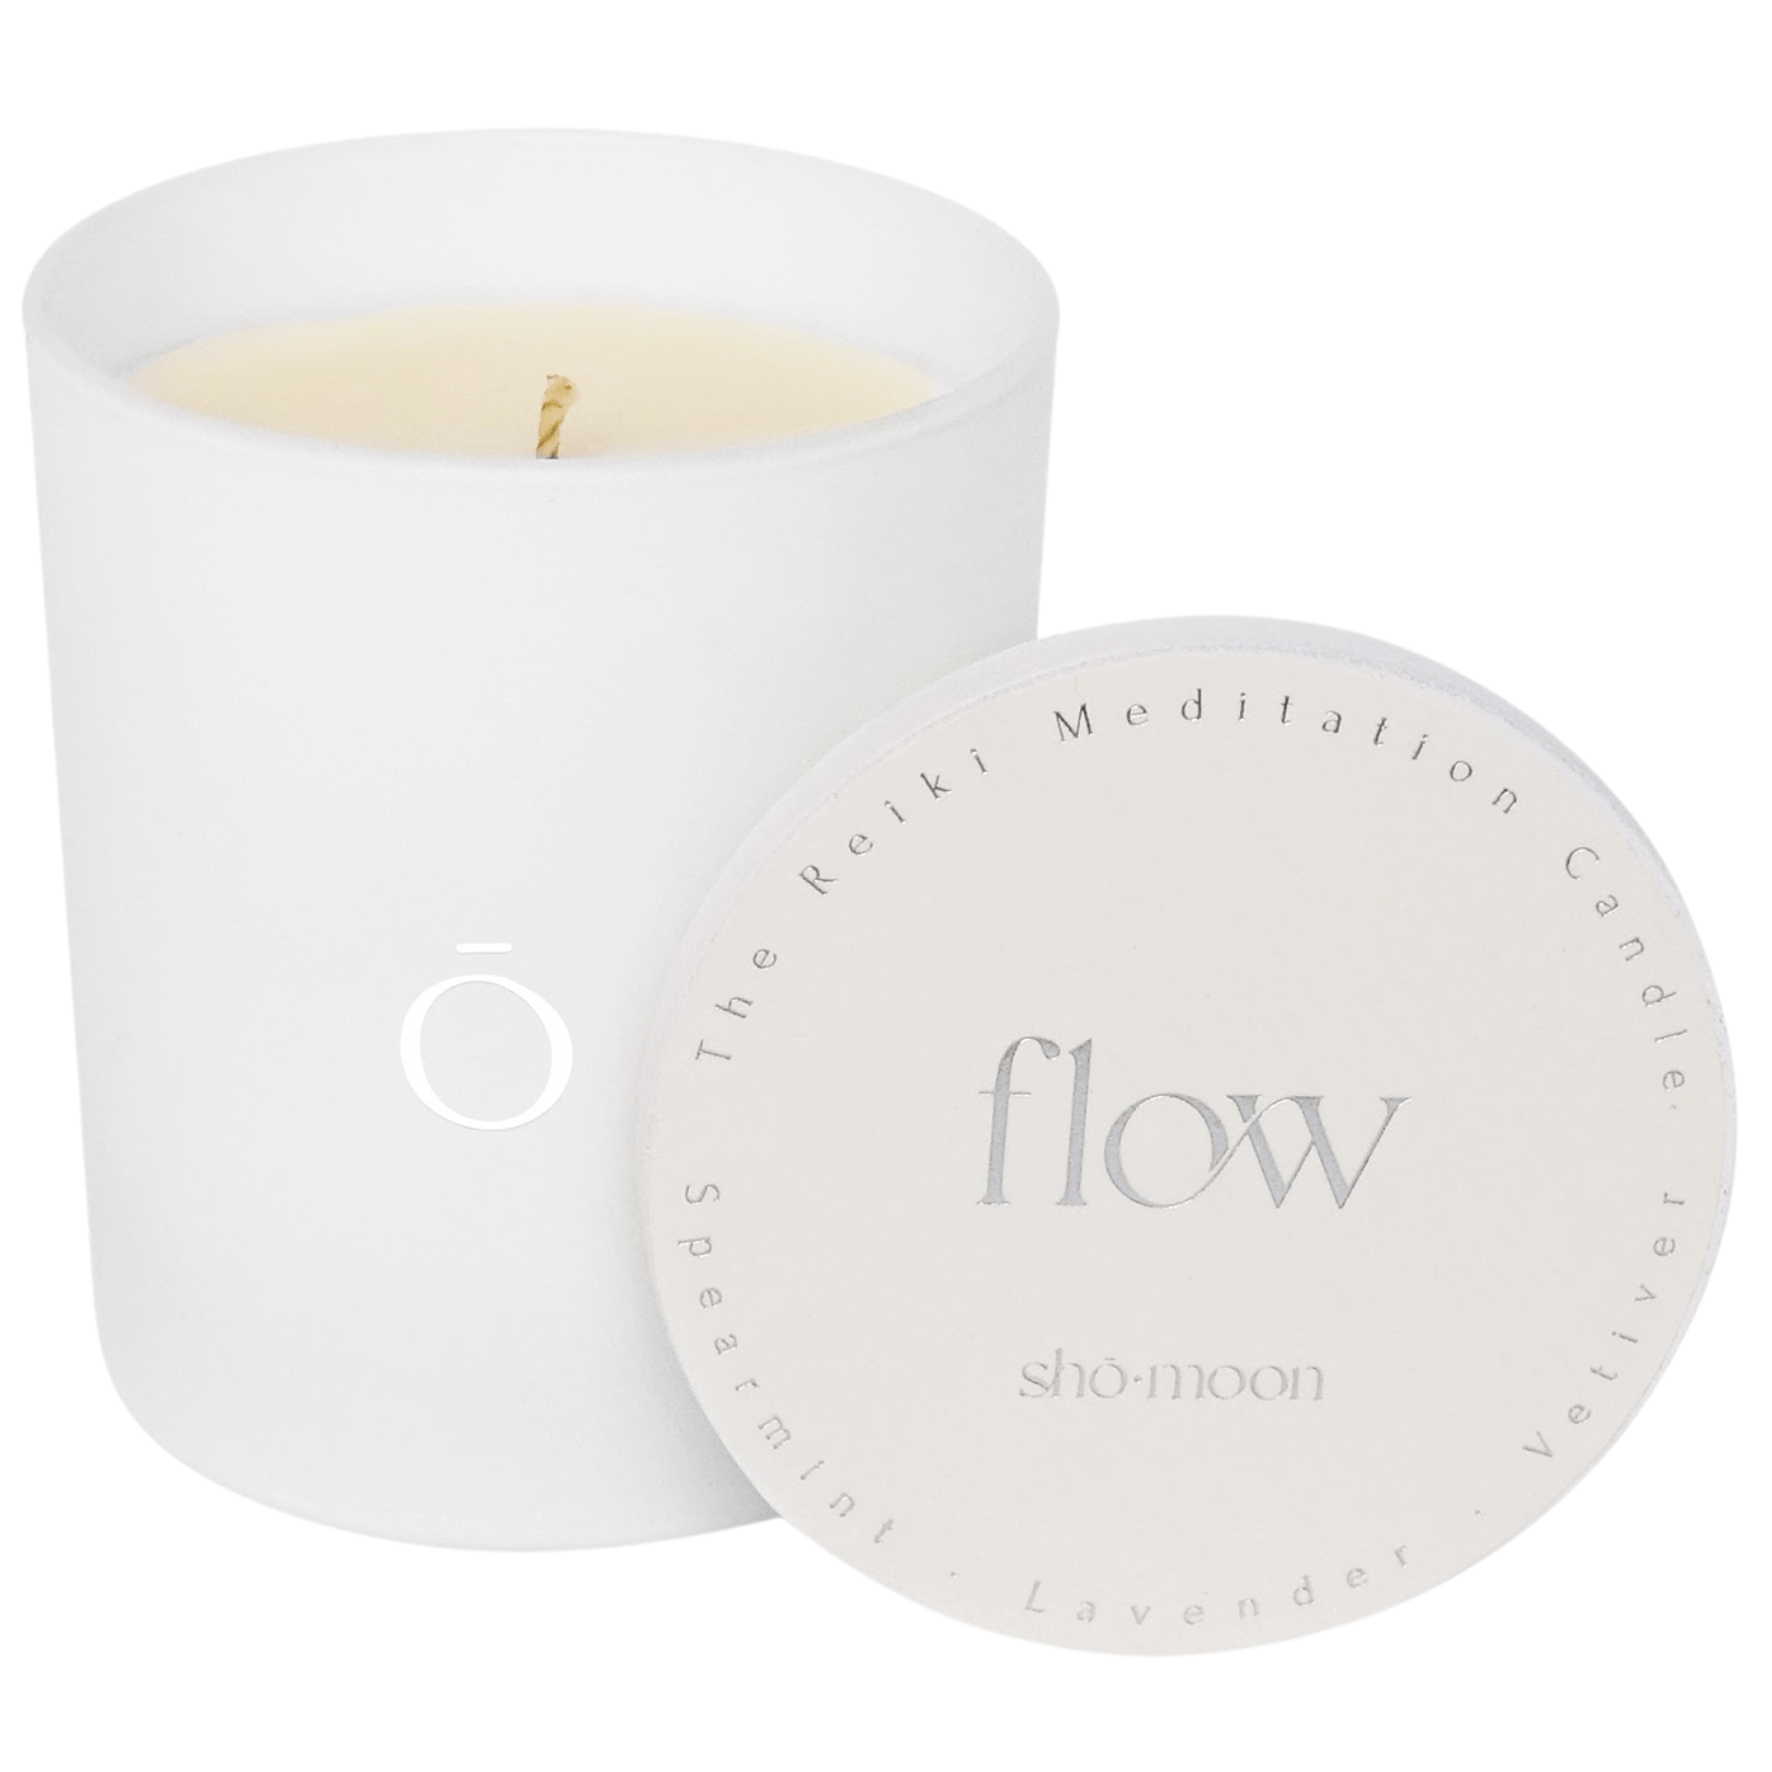 Shō-moon Flow Meditation Candle with pure essentials oils and clean burning and natural wax